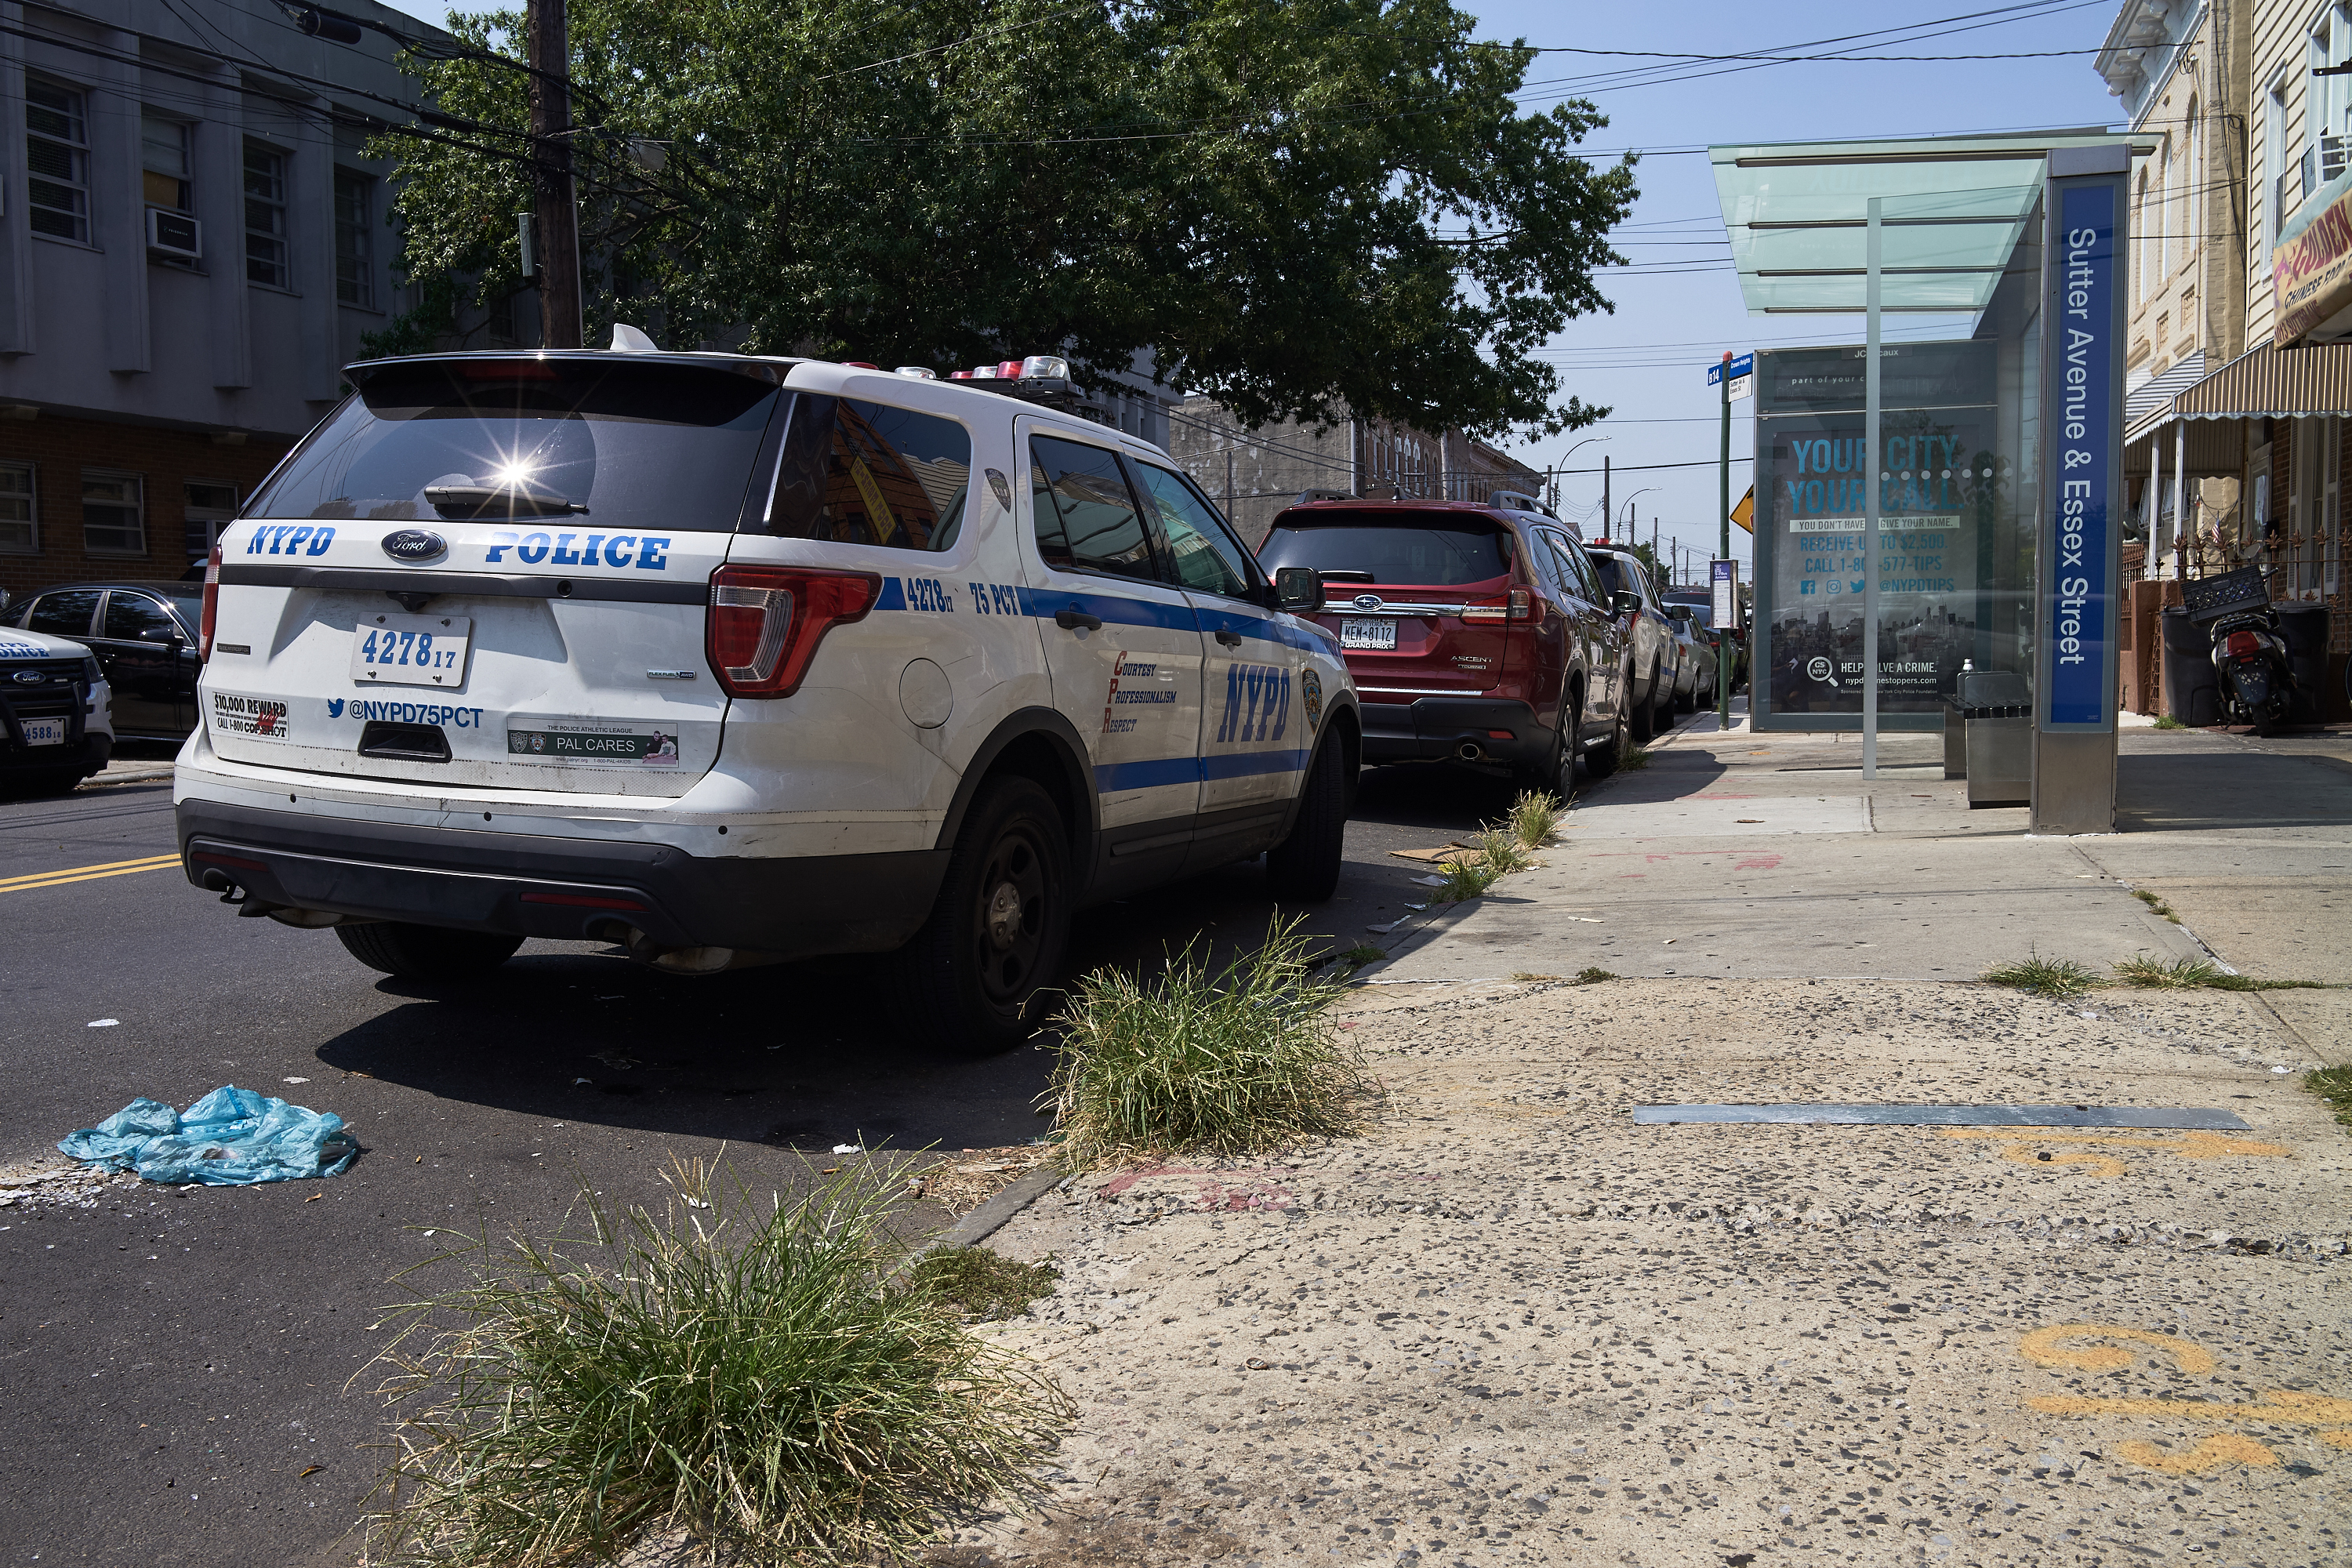 A NYPD vehicle parks at a B14 bus stop across the street from the 75th precinct in East New York on Aug. 25, 2020.